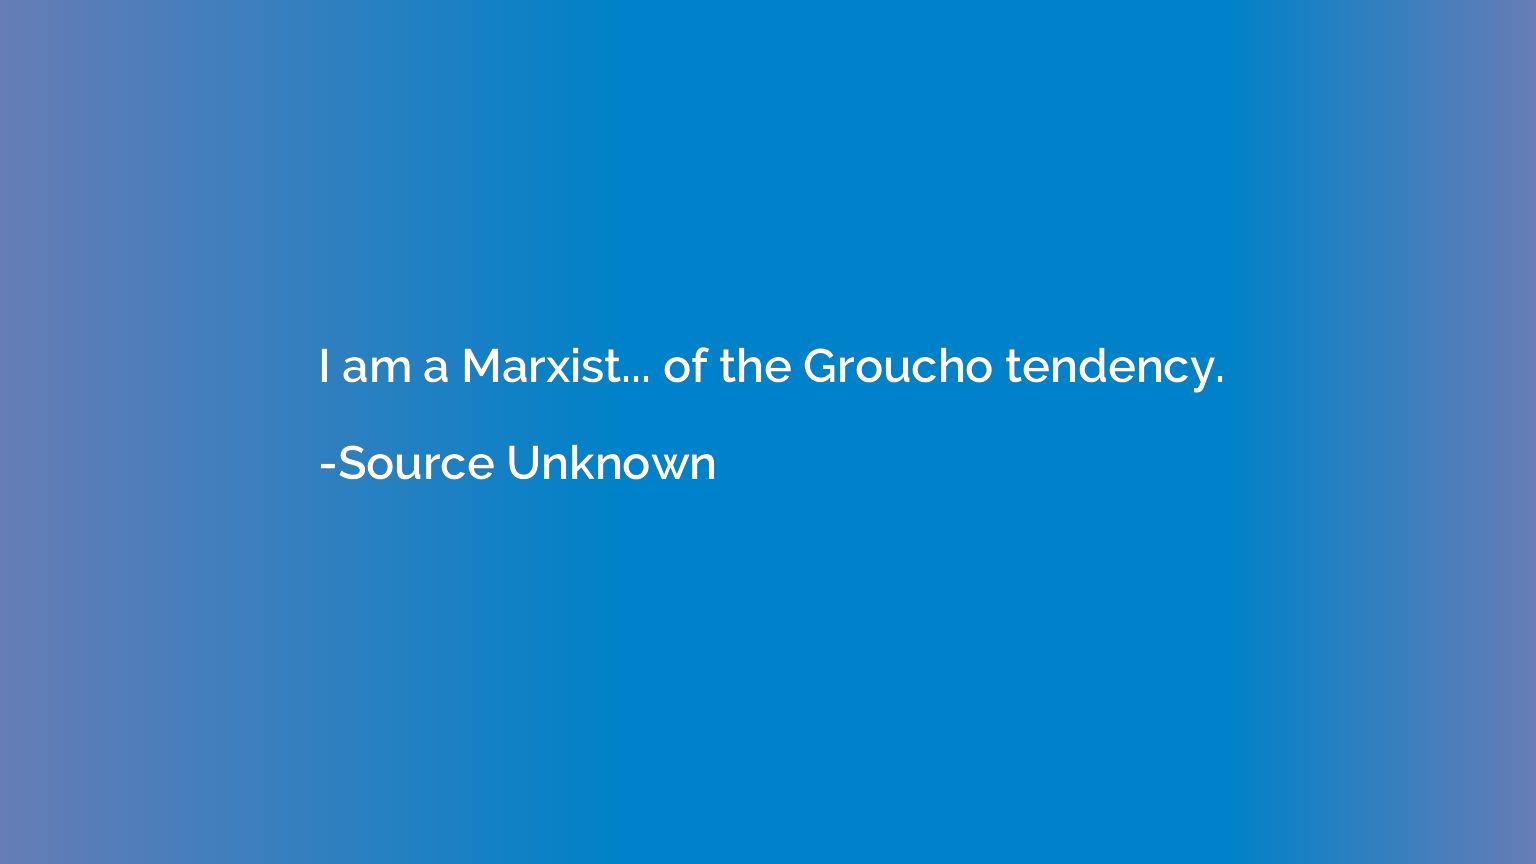 I am a Marxist... of the Groucho tendency.